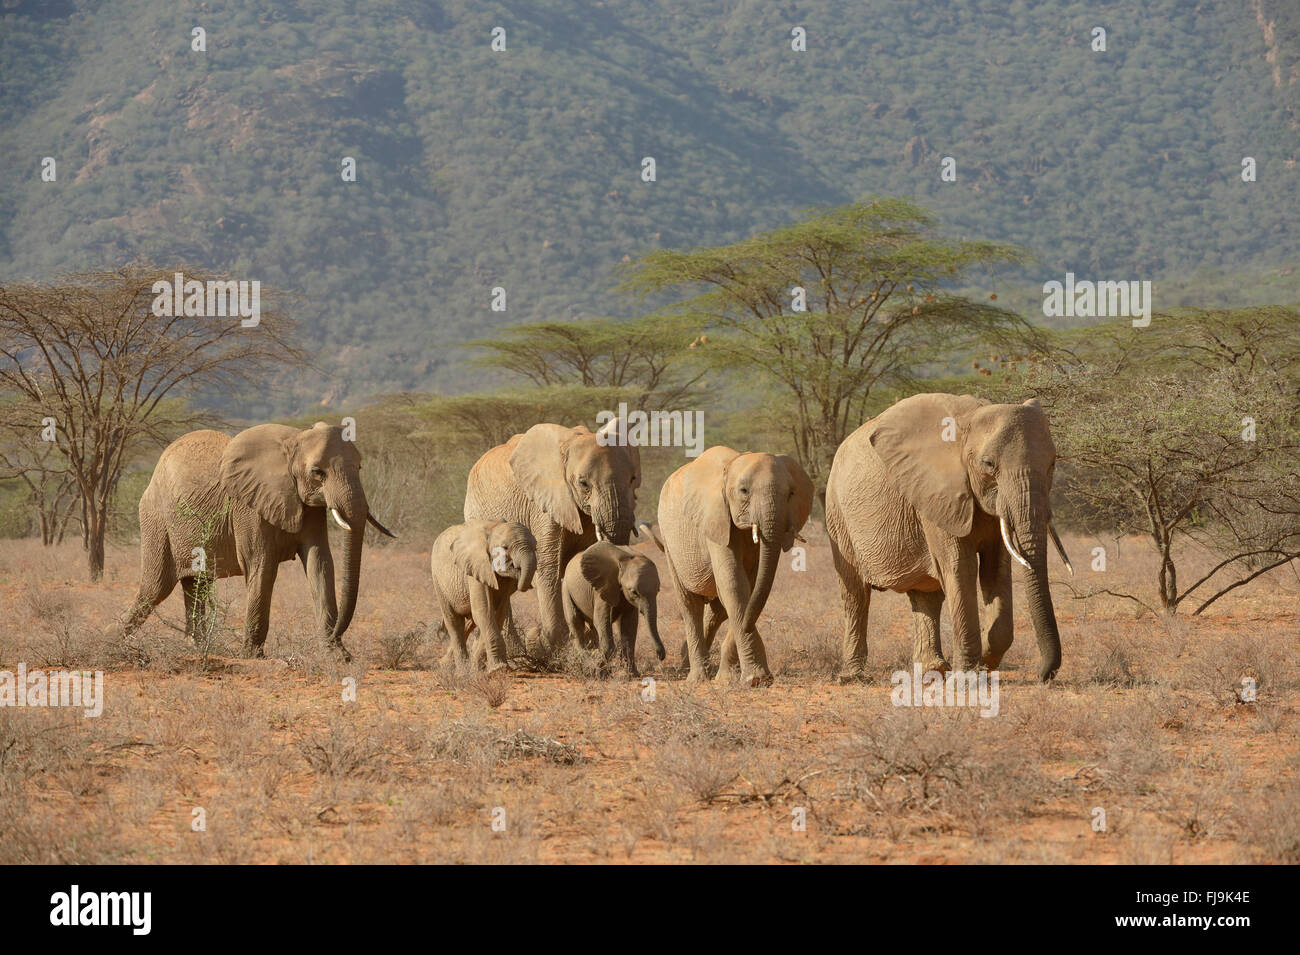 African Elephant (Loxodonta africana) small group of adults and young walking together in arid countryside, Shaba National Reser Stock Photo